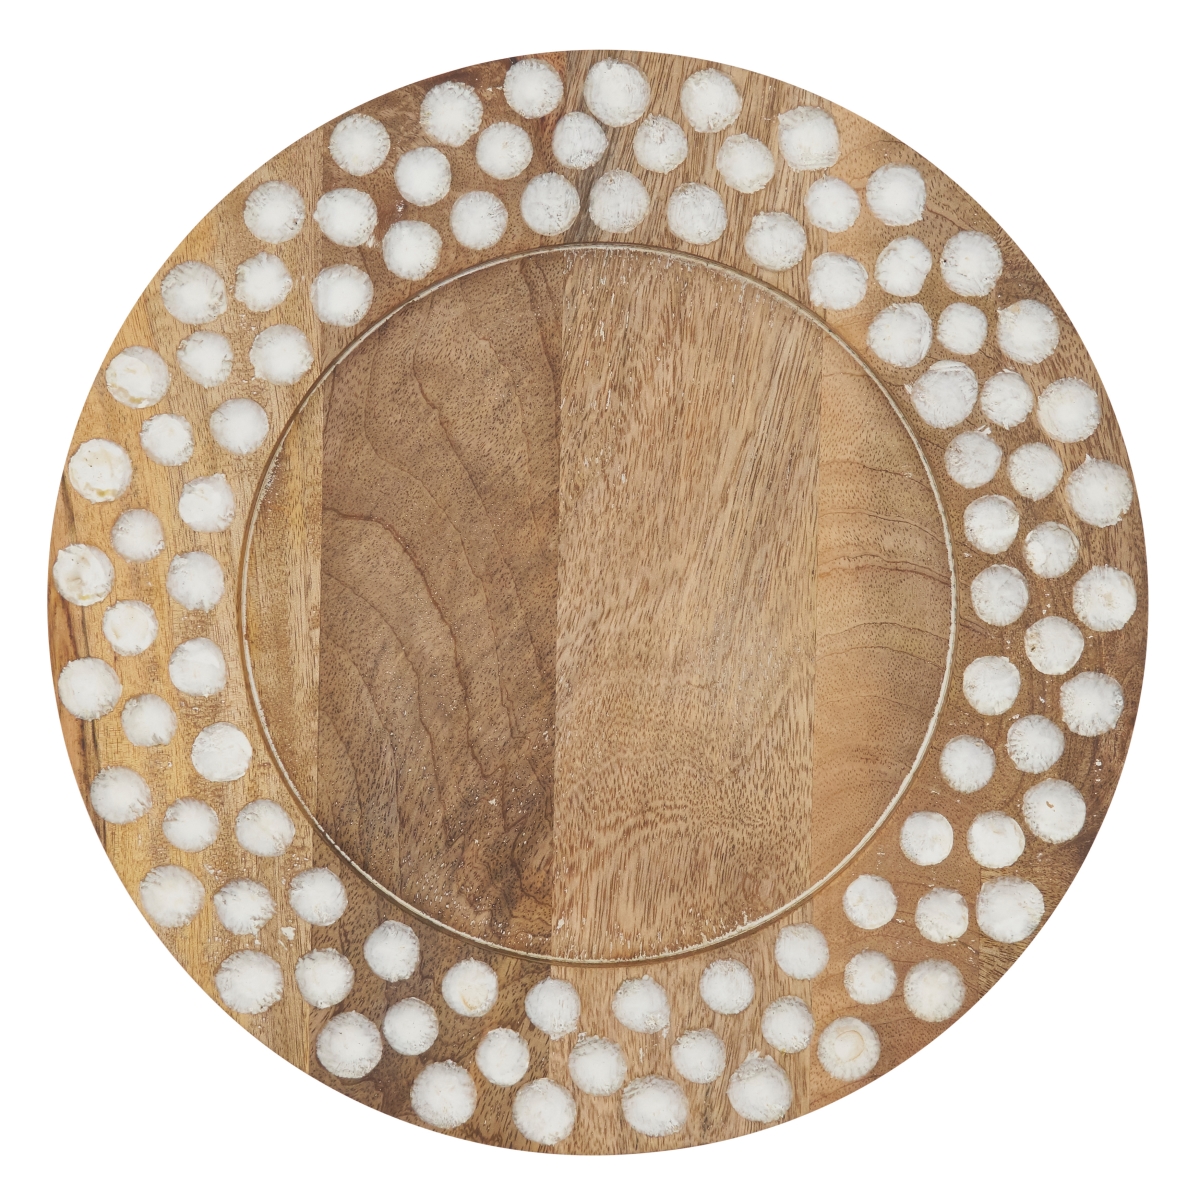 Picture of SARO CH214.N13R Wood Charger Plates with Dot Design - Set of 4